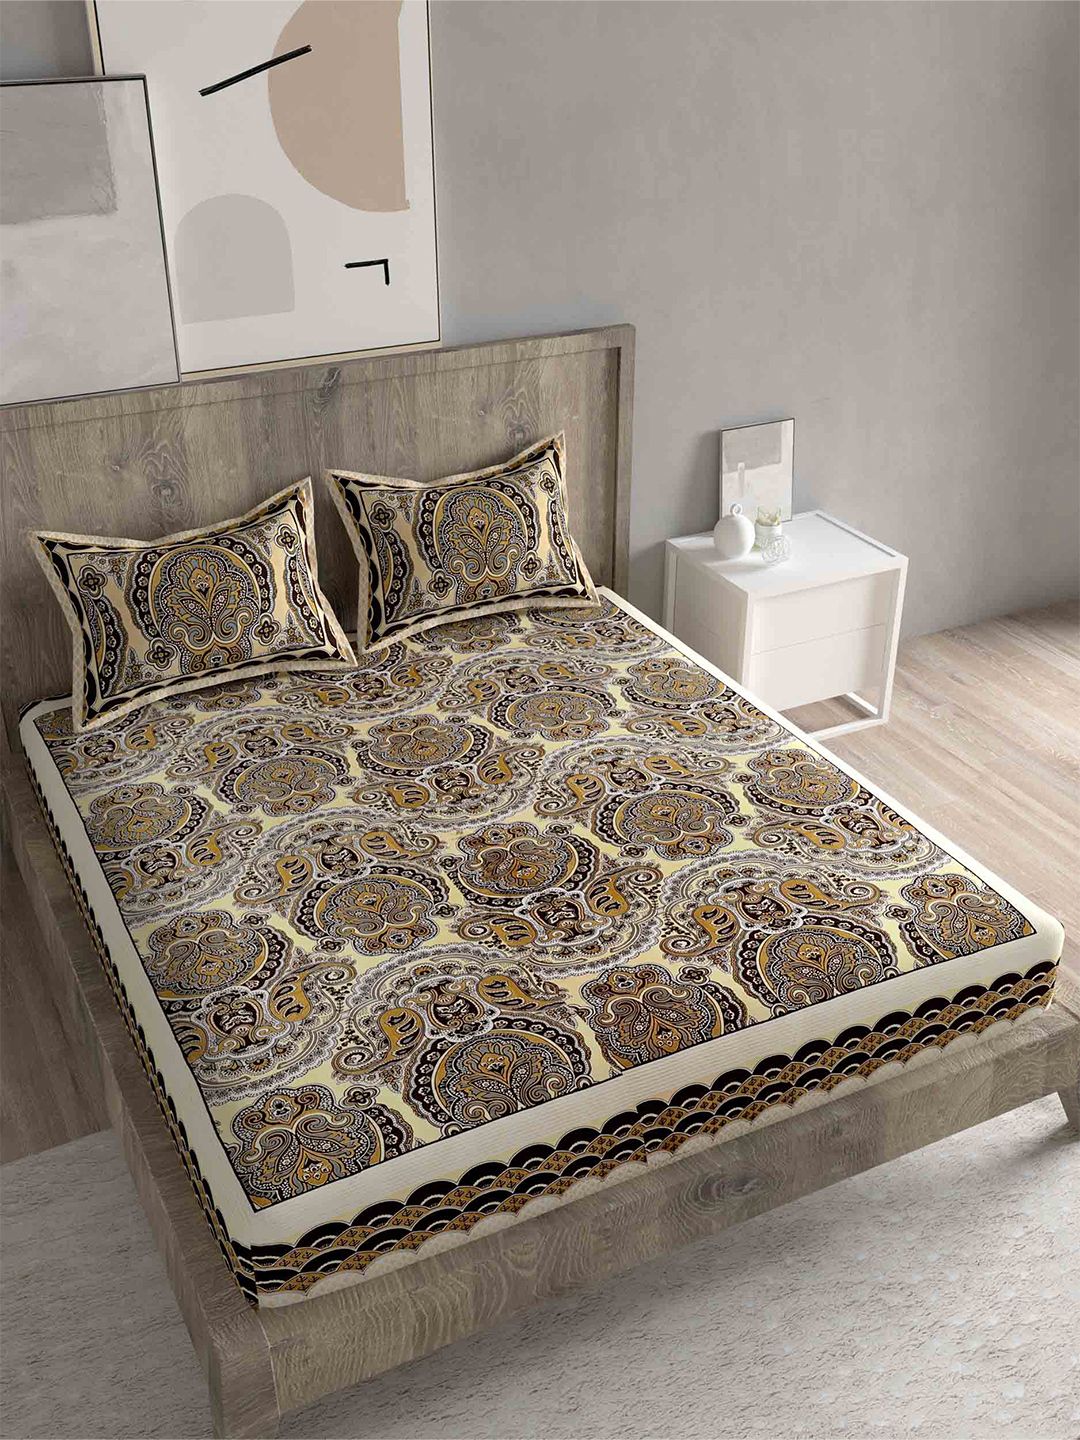 Spangle Beige & Yellow Ethnic Motifs Cotton 260 TC King Bedsheet with 2 Pillow Covers Price in India